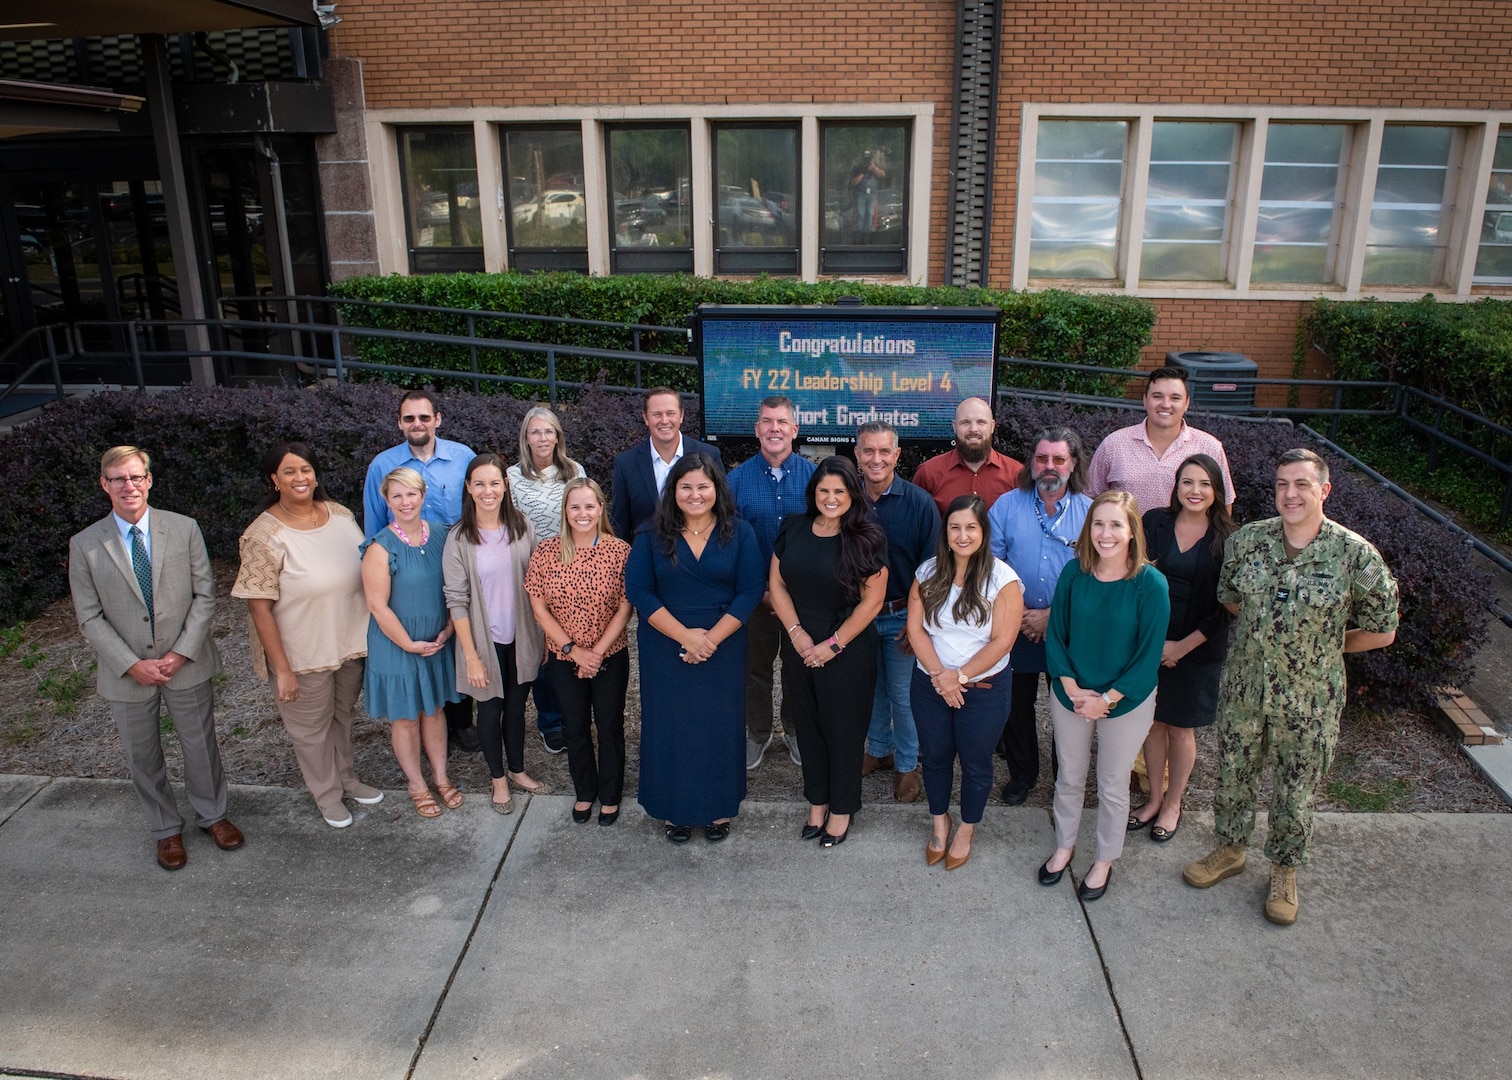 Congratulations to the Naval Surface Warfare Center Panama City Division Fiscal Year 2022 Leadership Level 4 Development Program cohort who stand with (right) NSWC PCD Commanding Officer Capt. David Back and (left) NSWC PCD Technical Director Dr. Peter Adair. LL4 graduates are Katherine Mapp, Peter Halvorson, Brett Troia, Carmelita Martin, David Hawes, Brian Brock, Monica Queen, Dr. Michelle Kincer, Amanda Bobe, Christopher Harrington, Tinsley Ihaksi, Rosa Eby, Stacy Faison, Samantha Snellen, Amanda Elkins, Joy St Amant, Robert Worcester, Shiva Singh, Jonathan Outlaw, and Phillip Allen. (U.S. Navy photo by Anthony Powers)